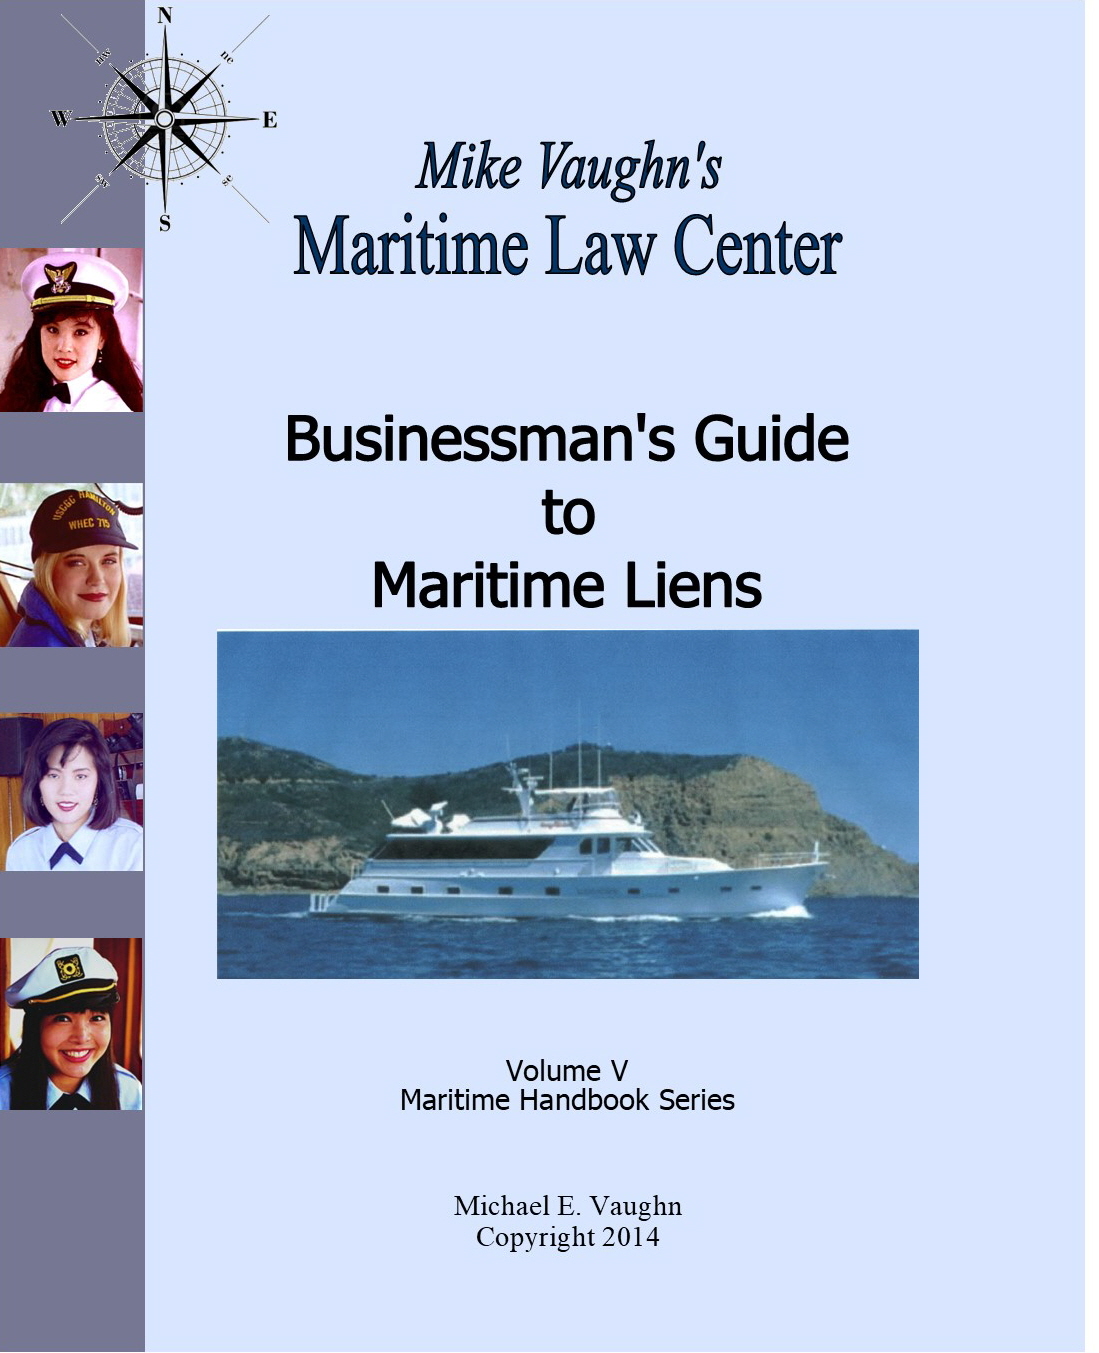 Bus. Guide to Maritime Liens - COVER